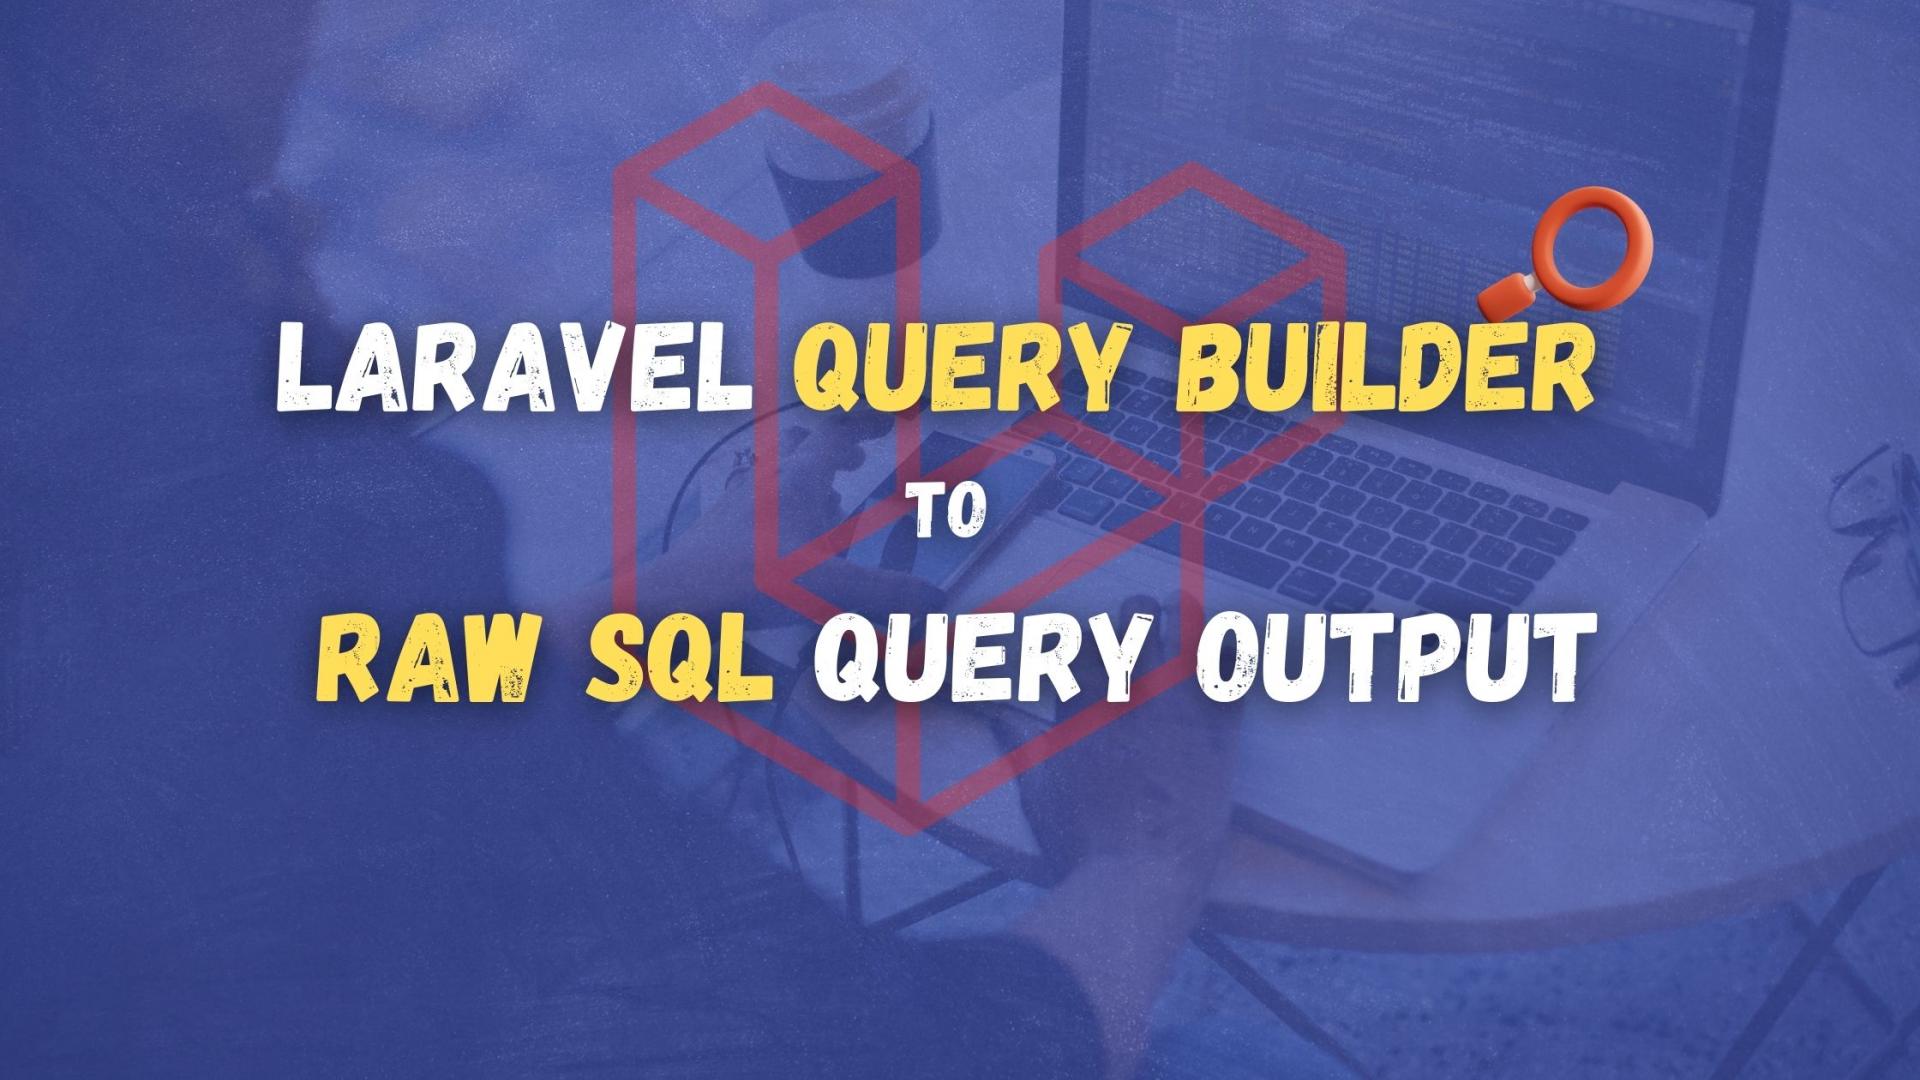 How to get the Laravel Query Builder to Output the Raw SQL Query?